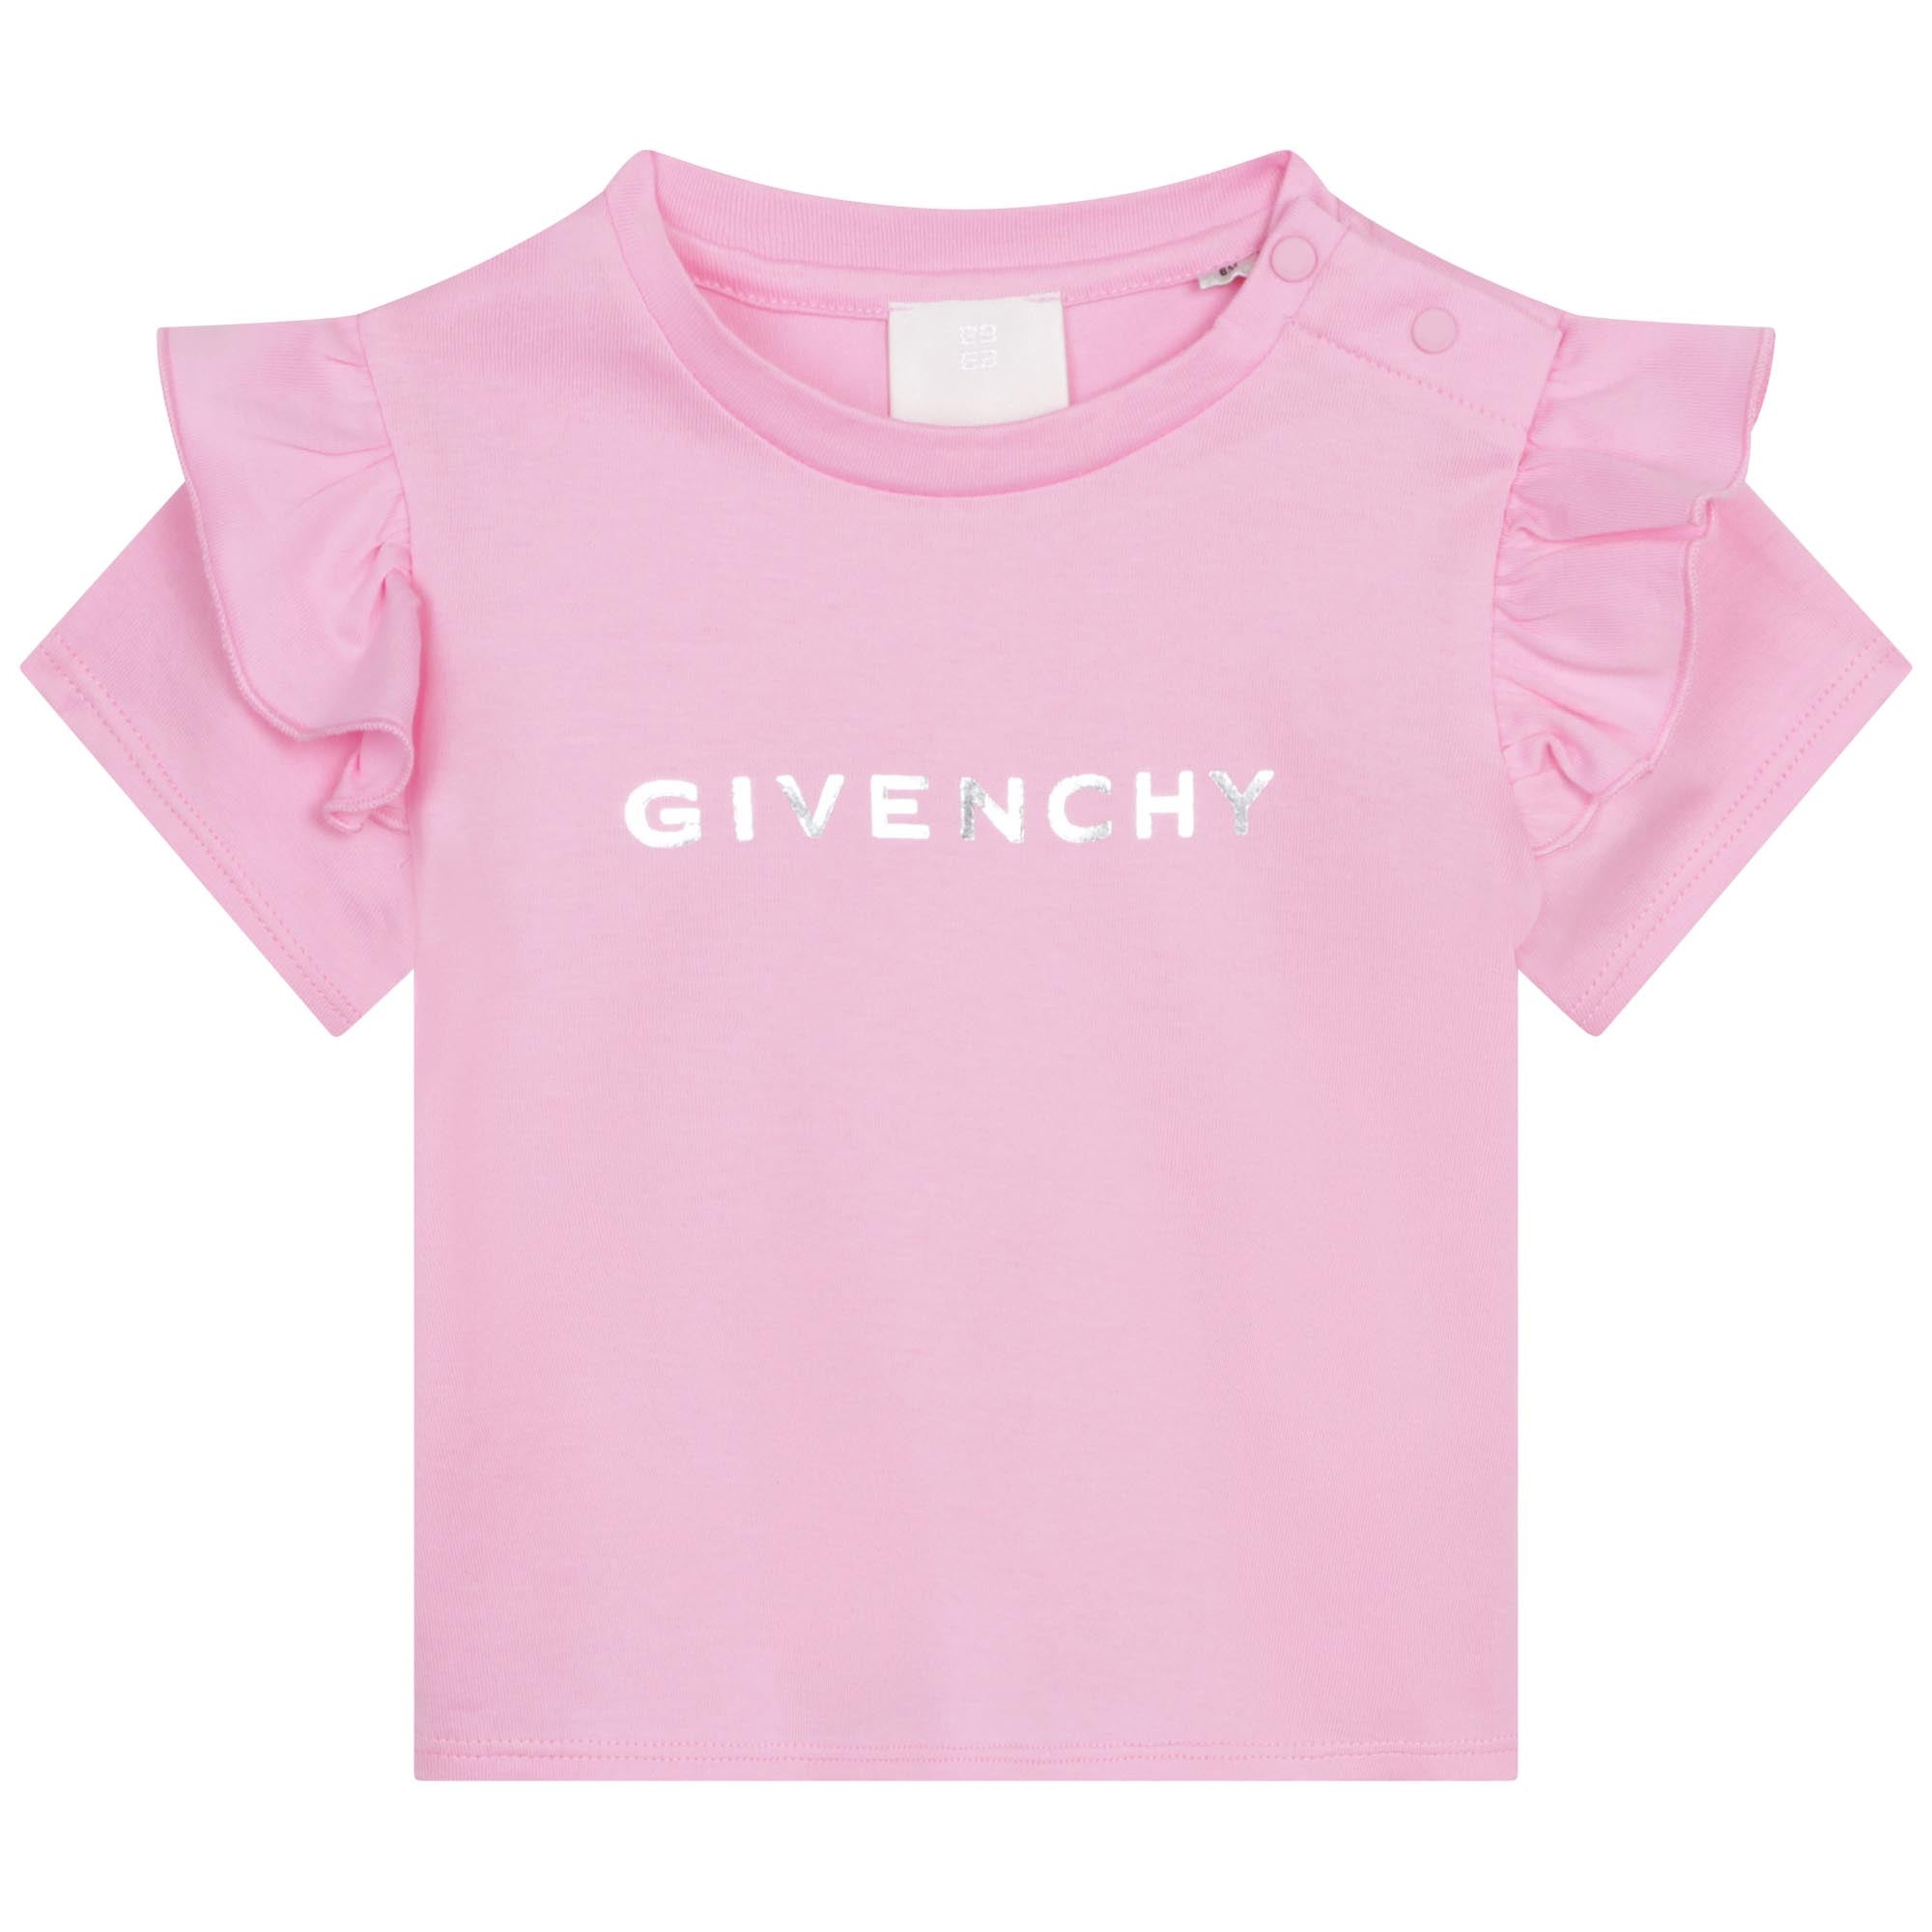 Givenchy Baby Girls Pink T-Shirt